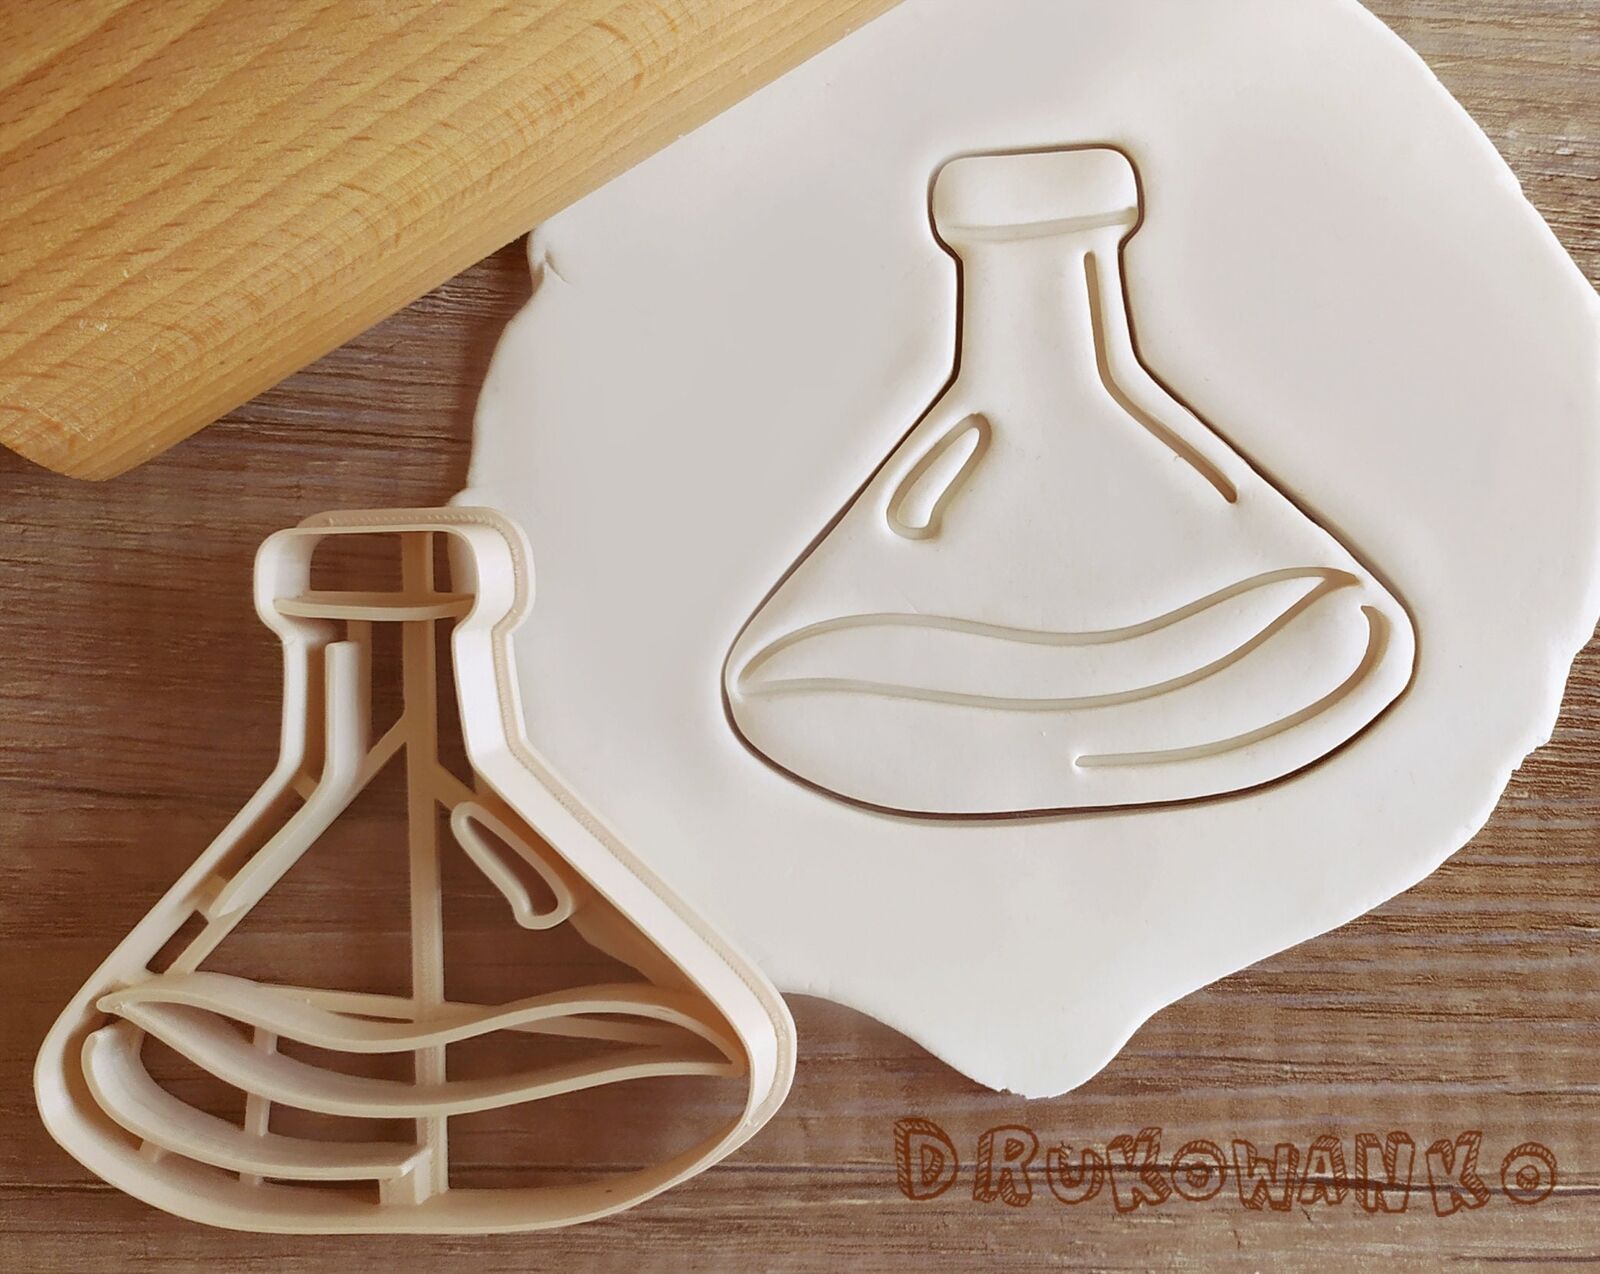 Test Vial Vials Triangular Flask Tube Laboratory Science Cookie Cutter